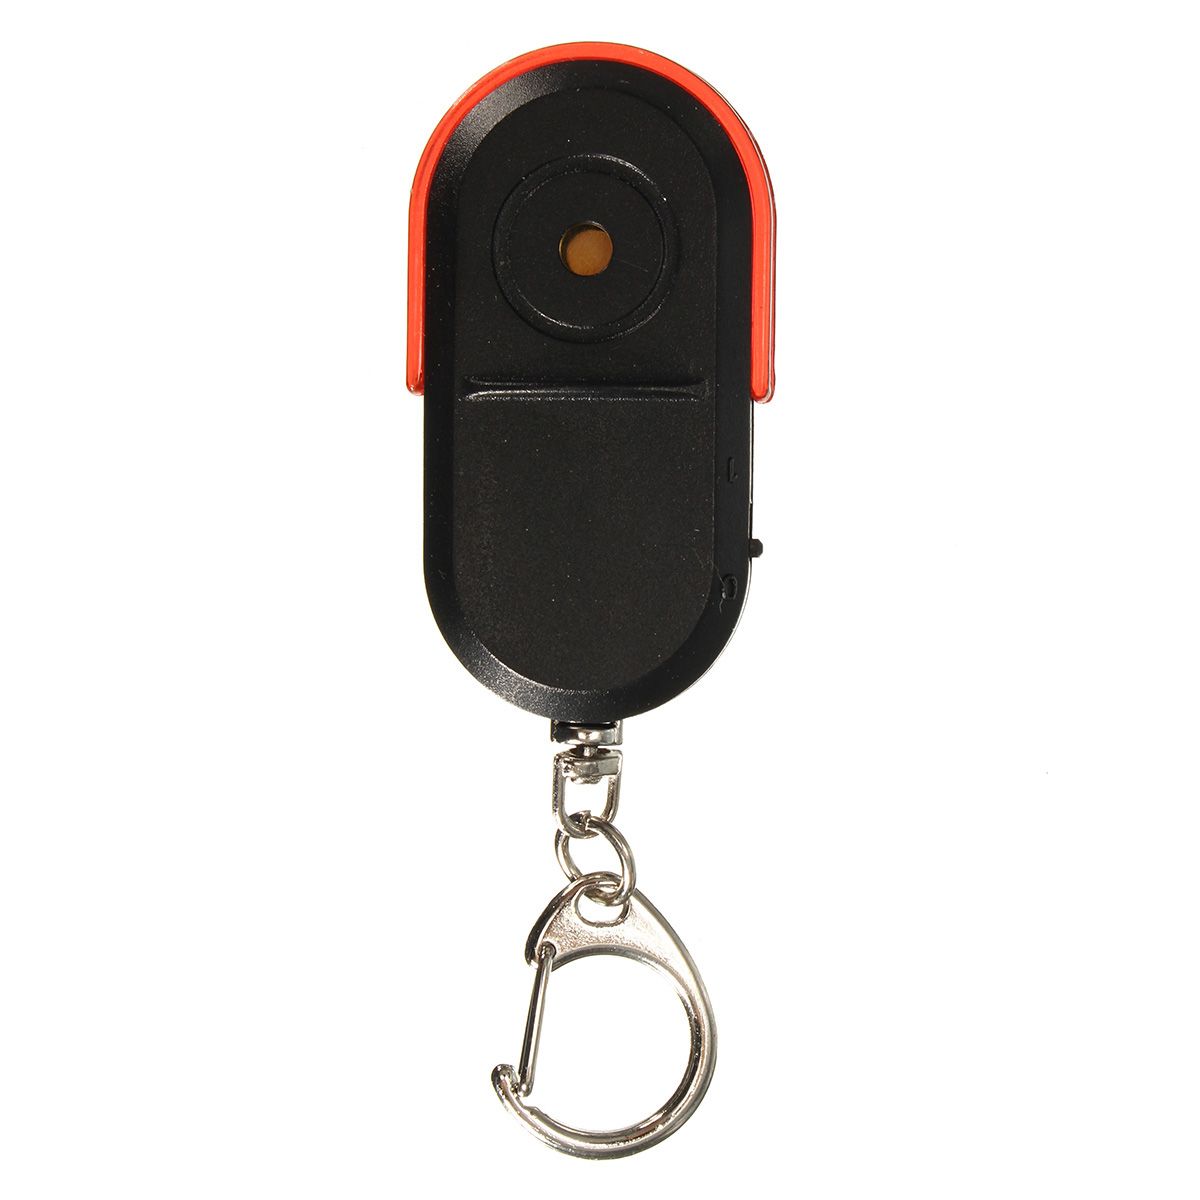 Wireless-Anti-Lost-Alarm-Key-Finder-Locator-Keychain-Whistle-Sound-with-LED-Light-1030593